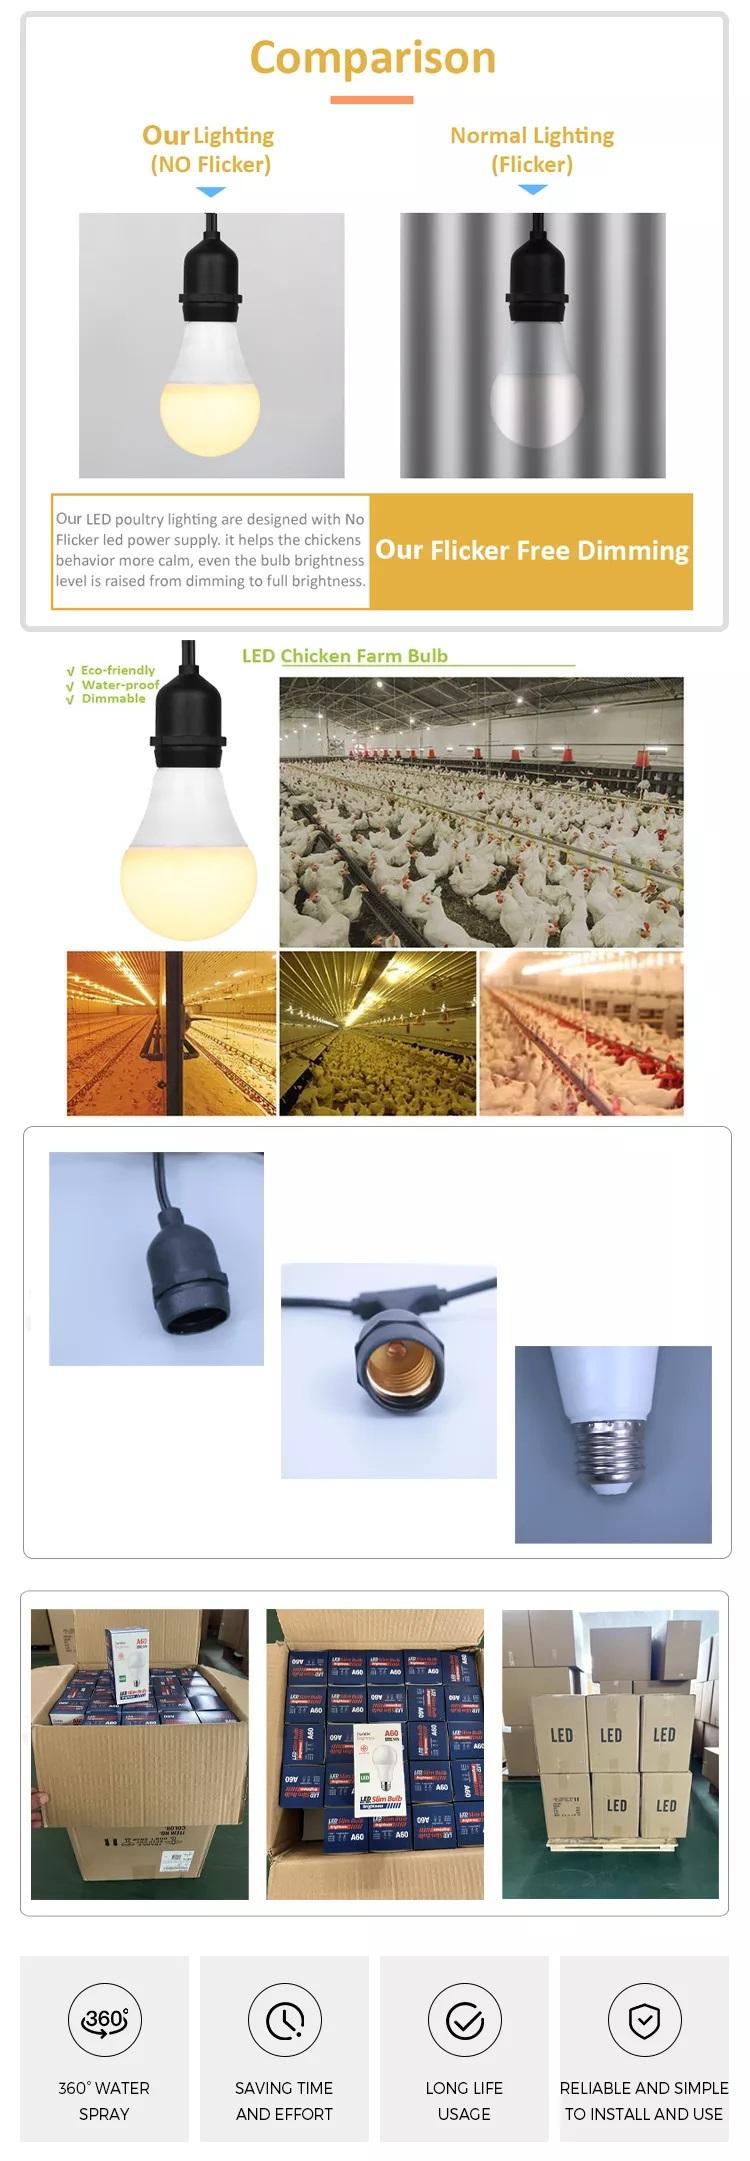 Light system for poultry farms 